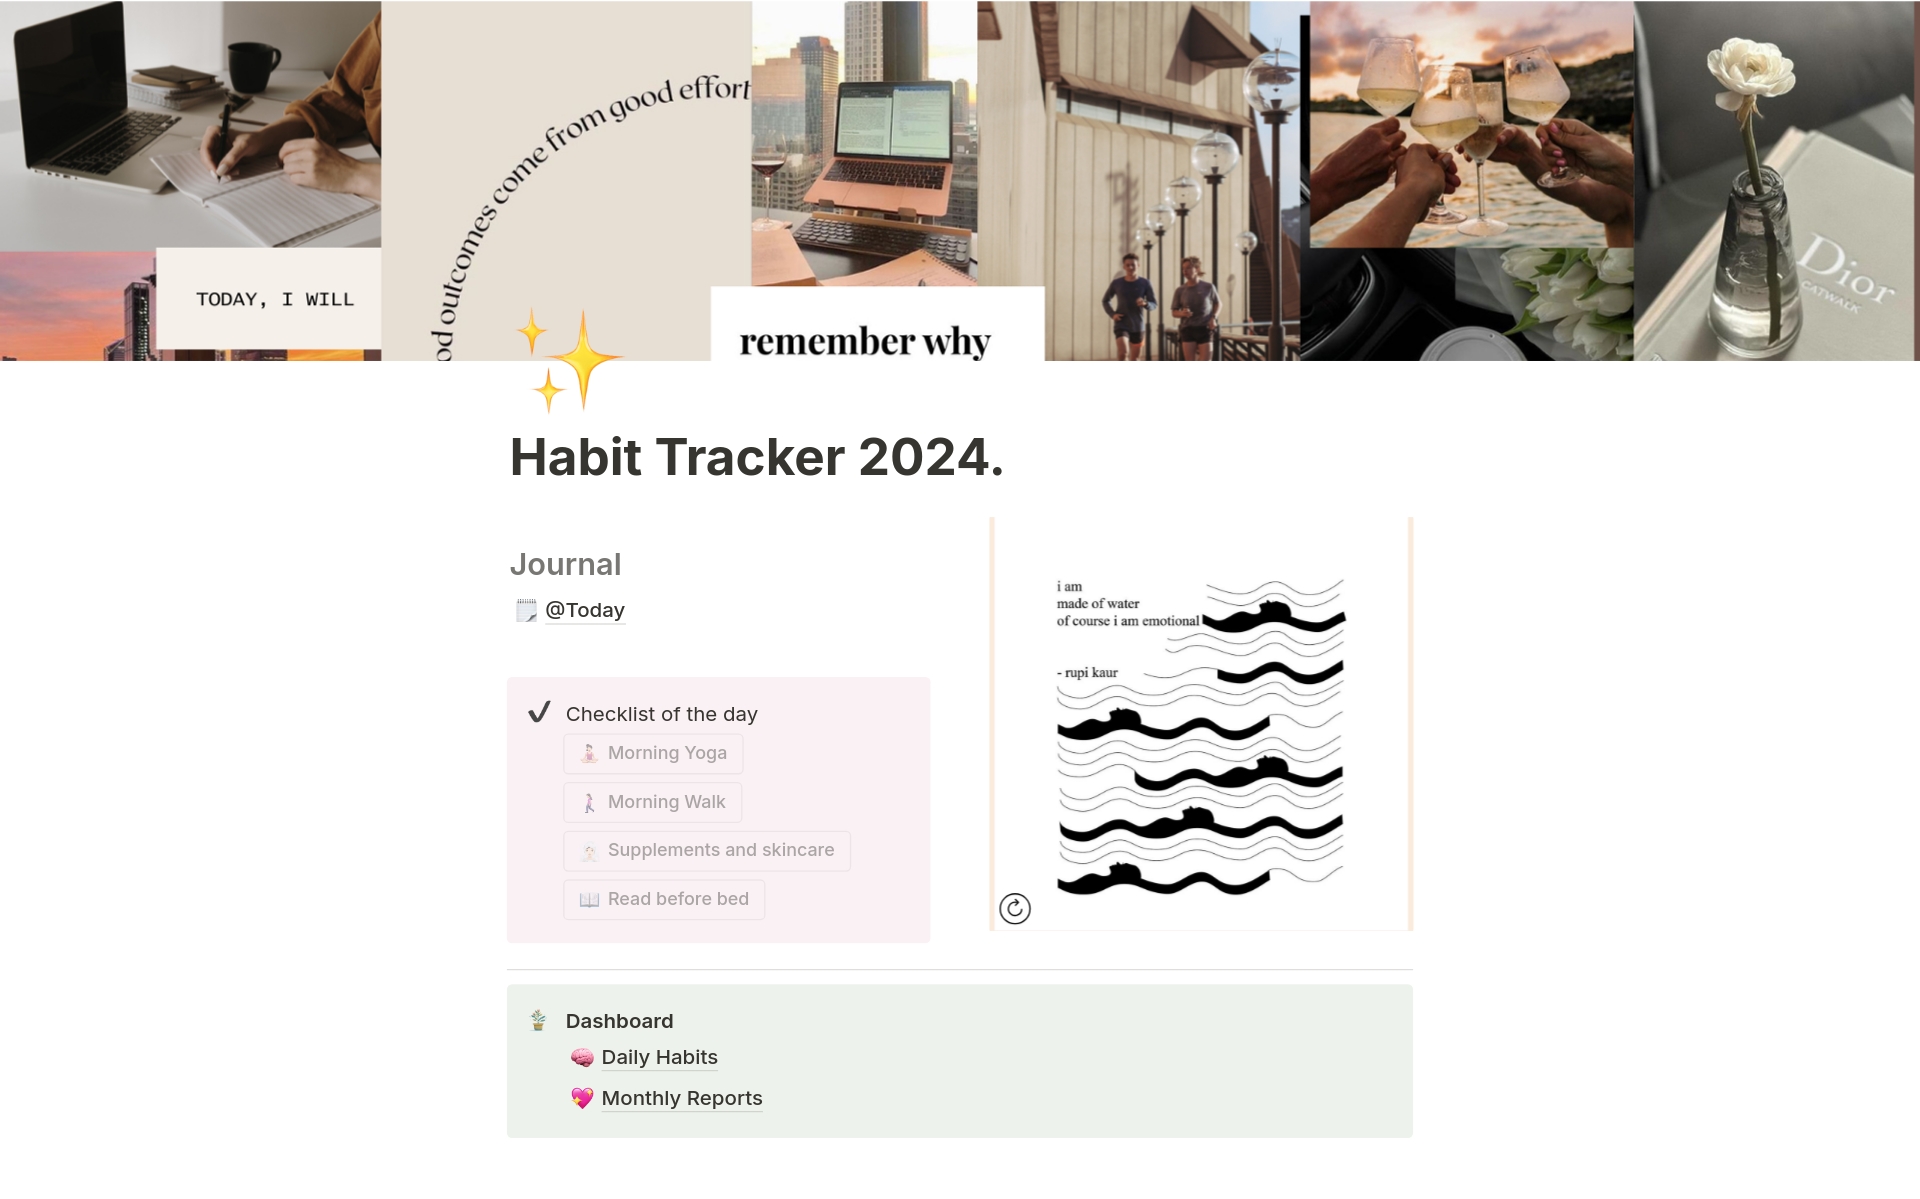 Habit Tracker to finally achieve your goals and get your life together